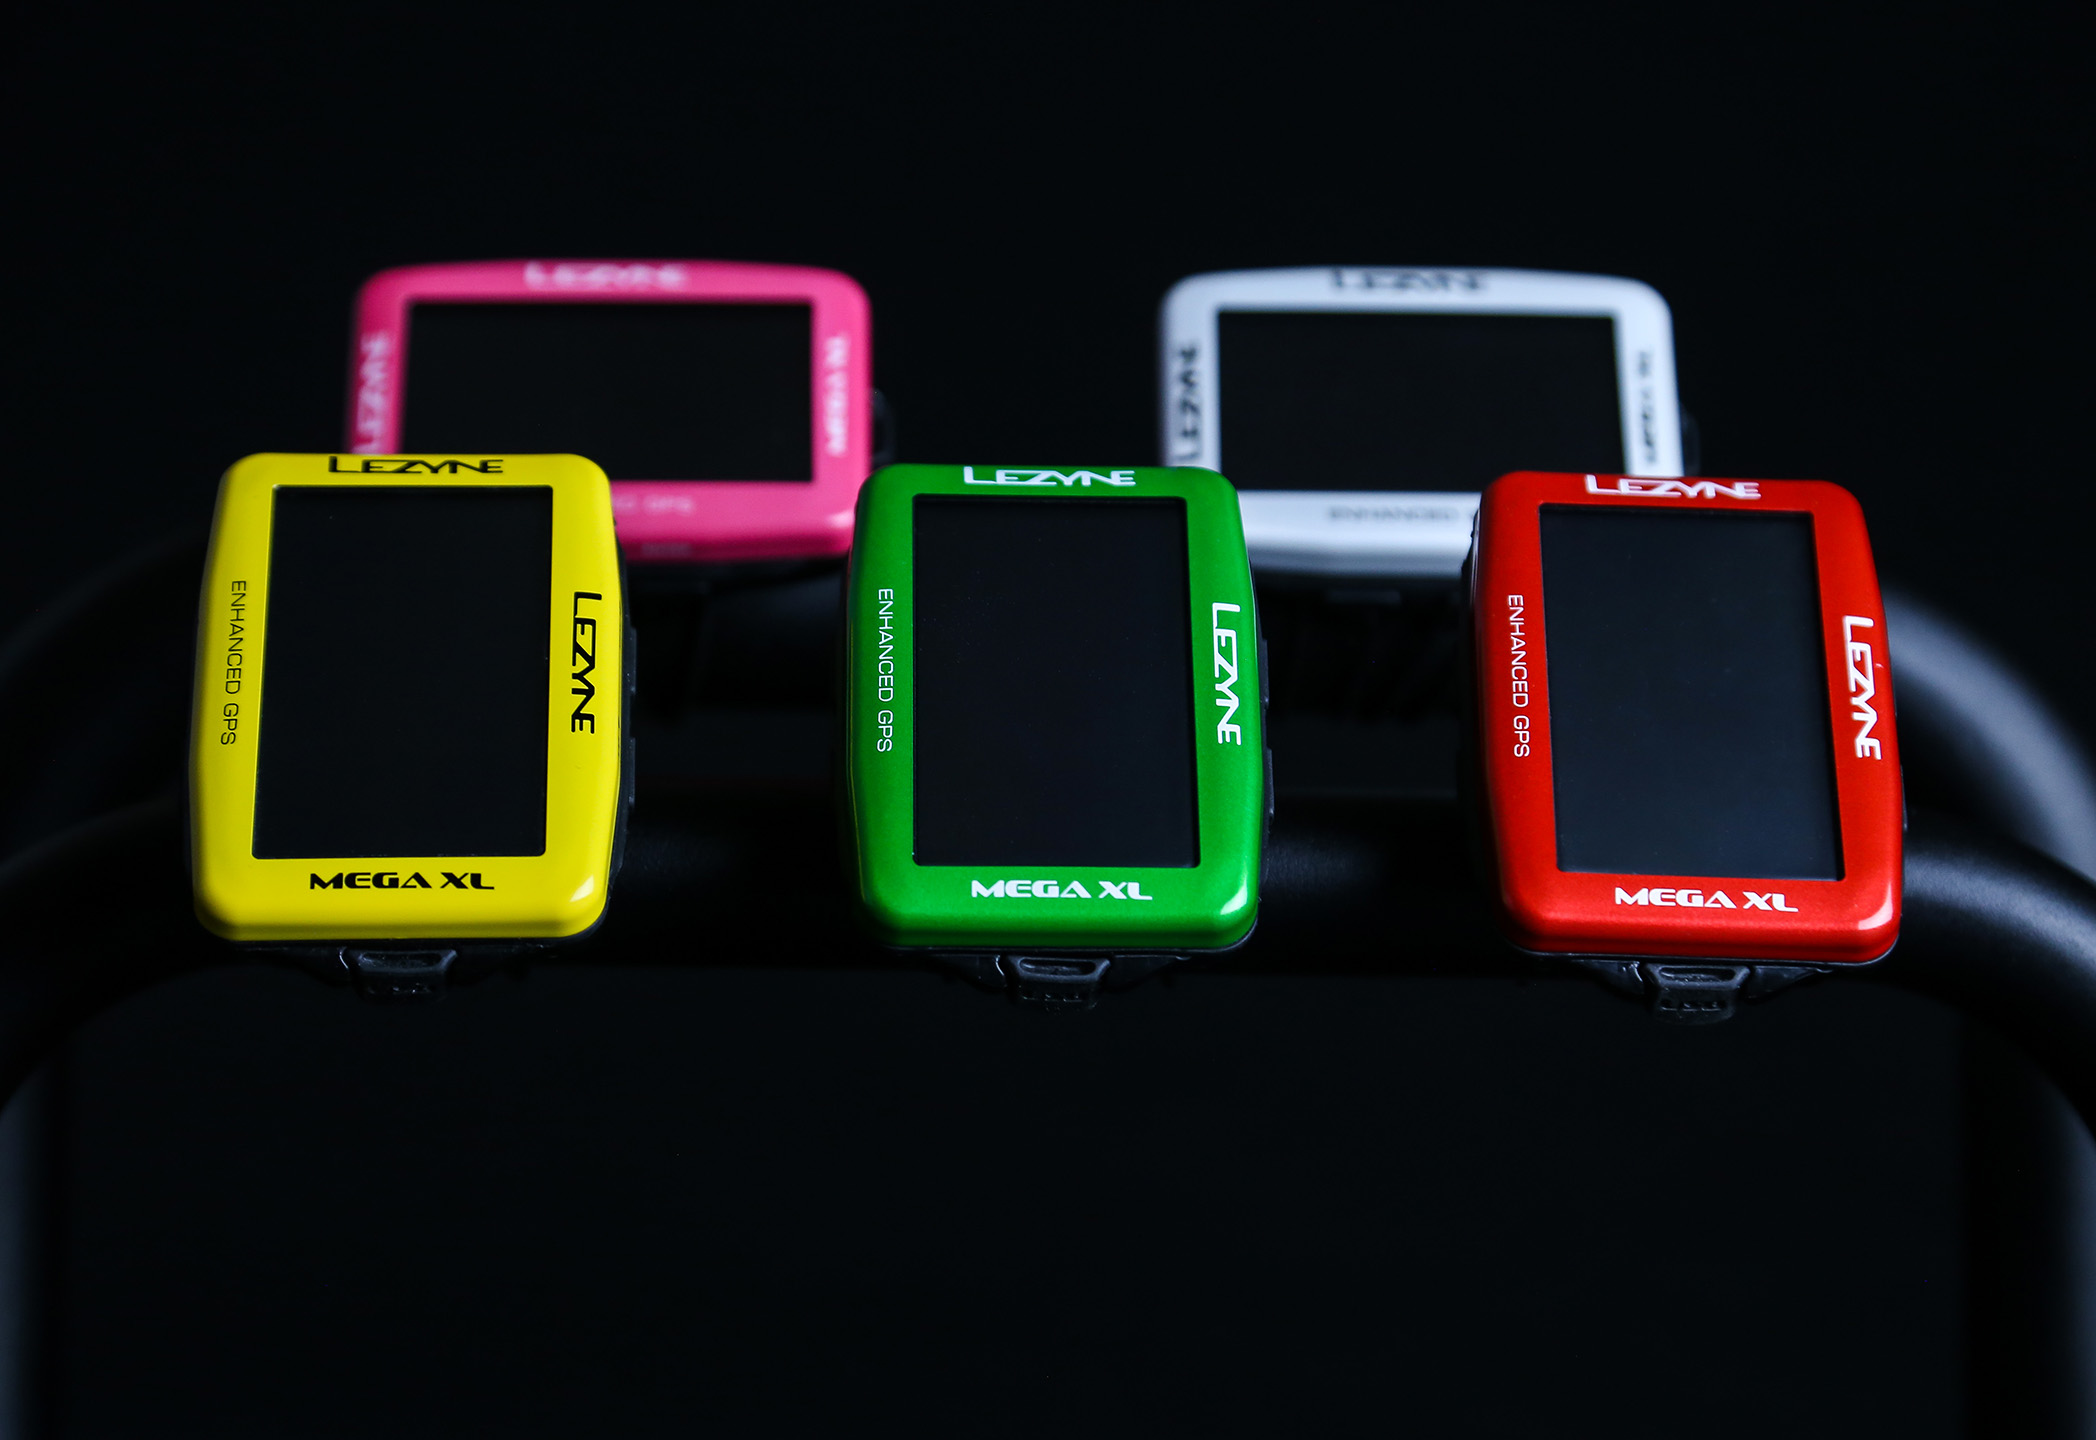 Limited Edition colorful Lezyne Mega XL GPS units land in time for